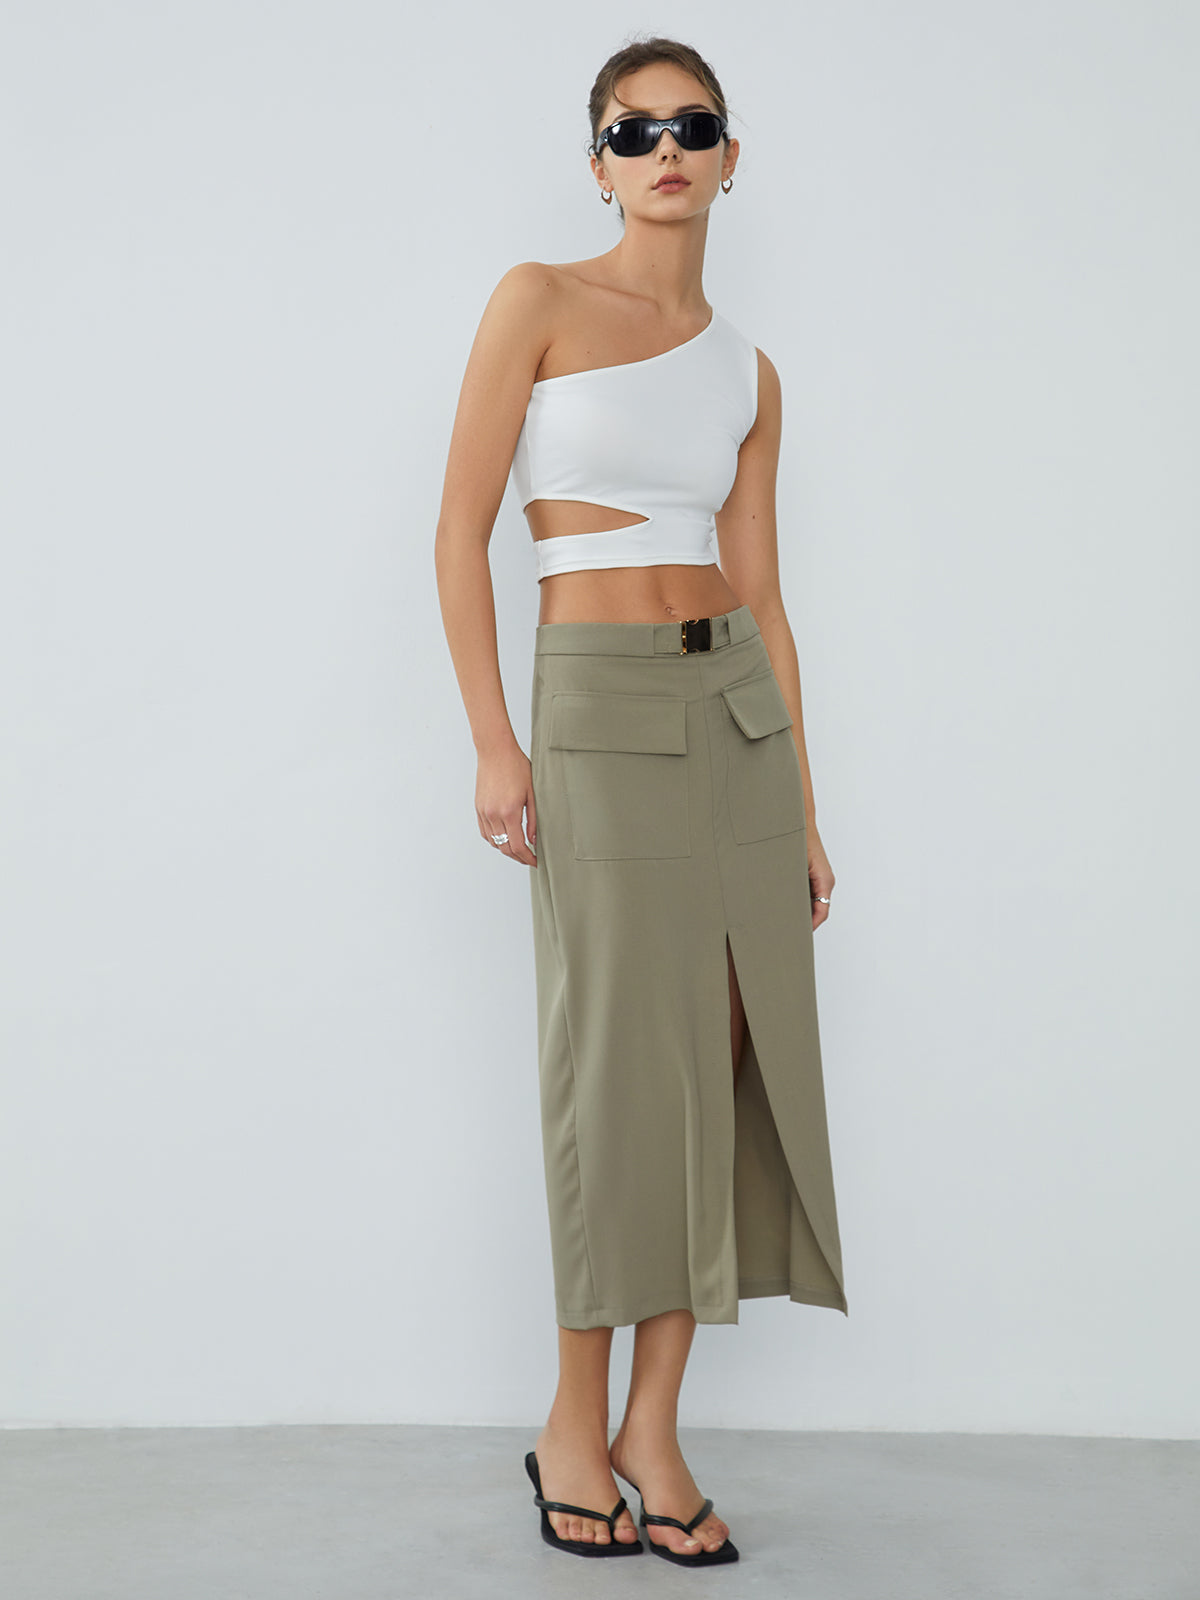 Zip Up Belted Pockets Midi Skirt